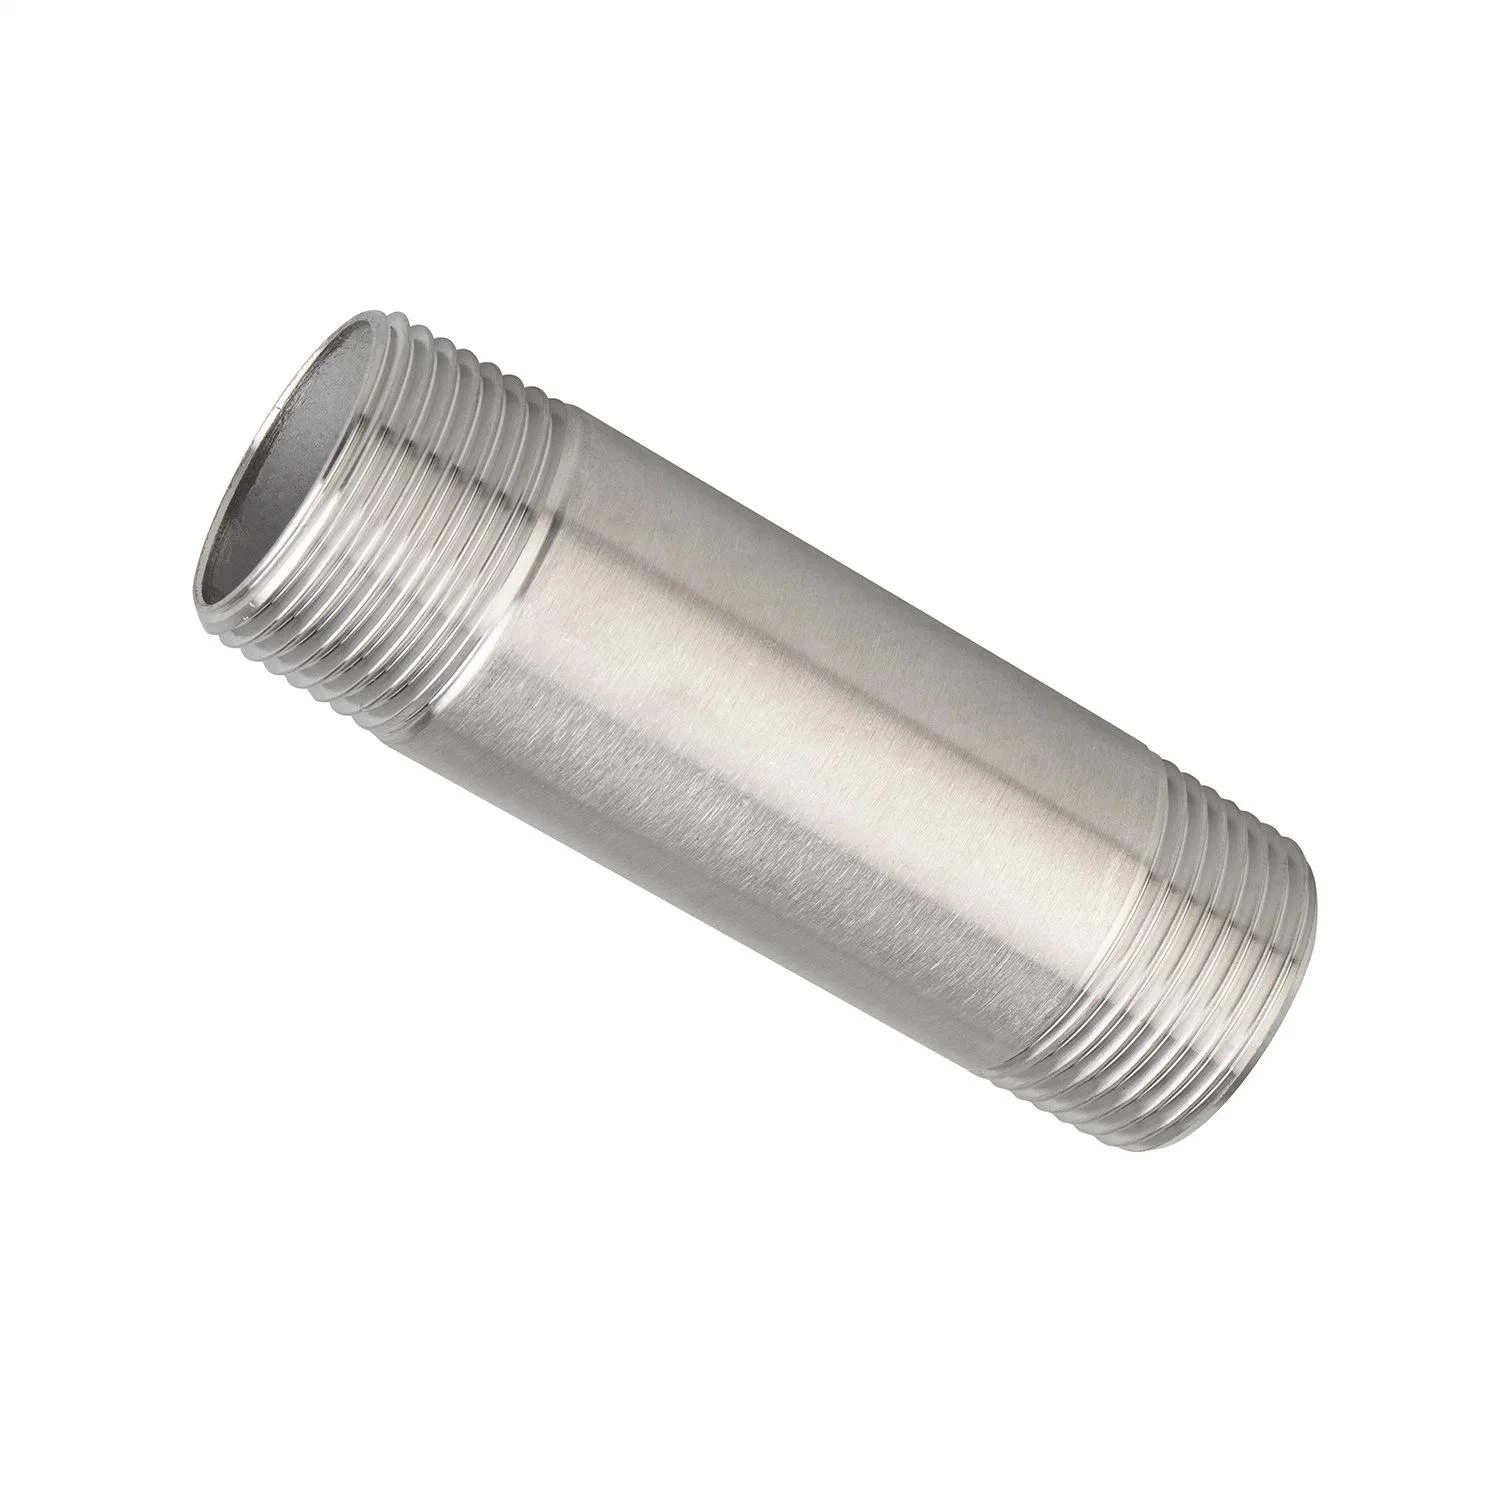 Stainless Steel Pipe Fitting 304 1/4"-4" NPT/BSPT Double Threaded Nipple